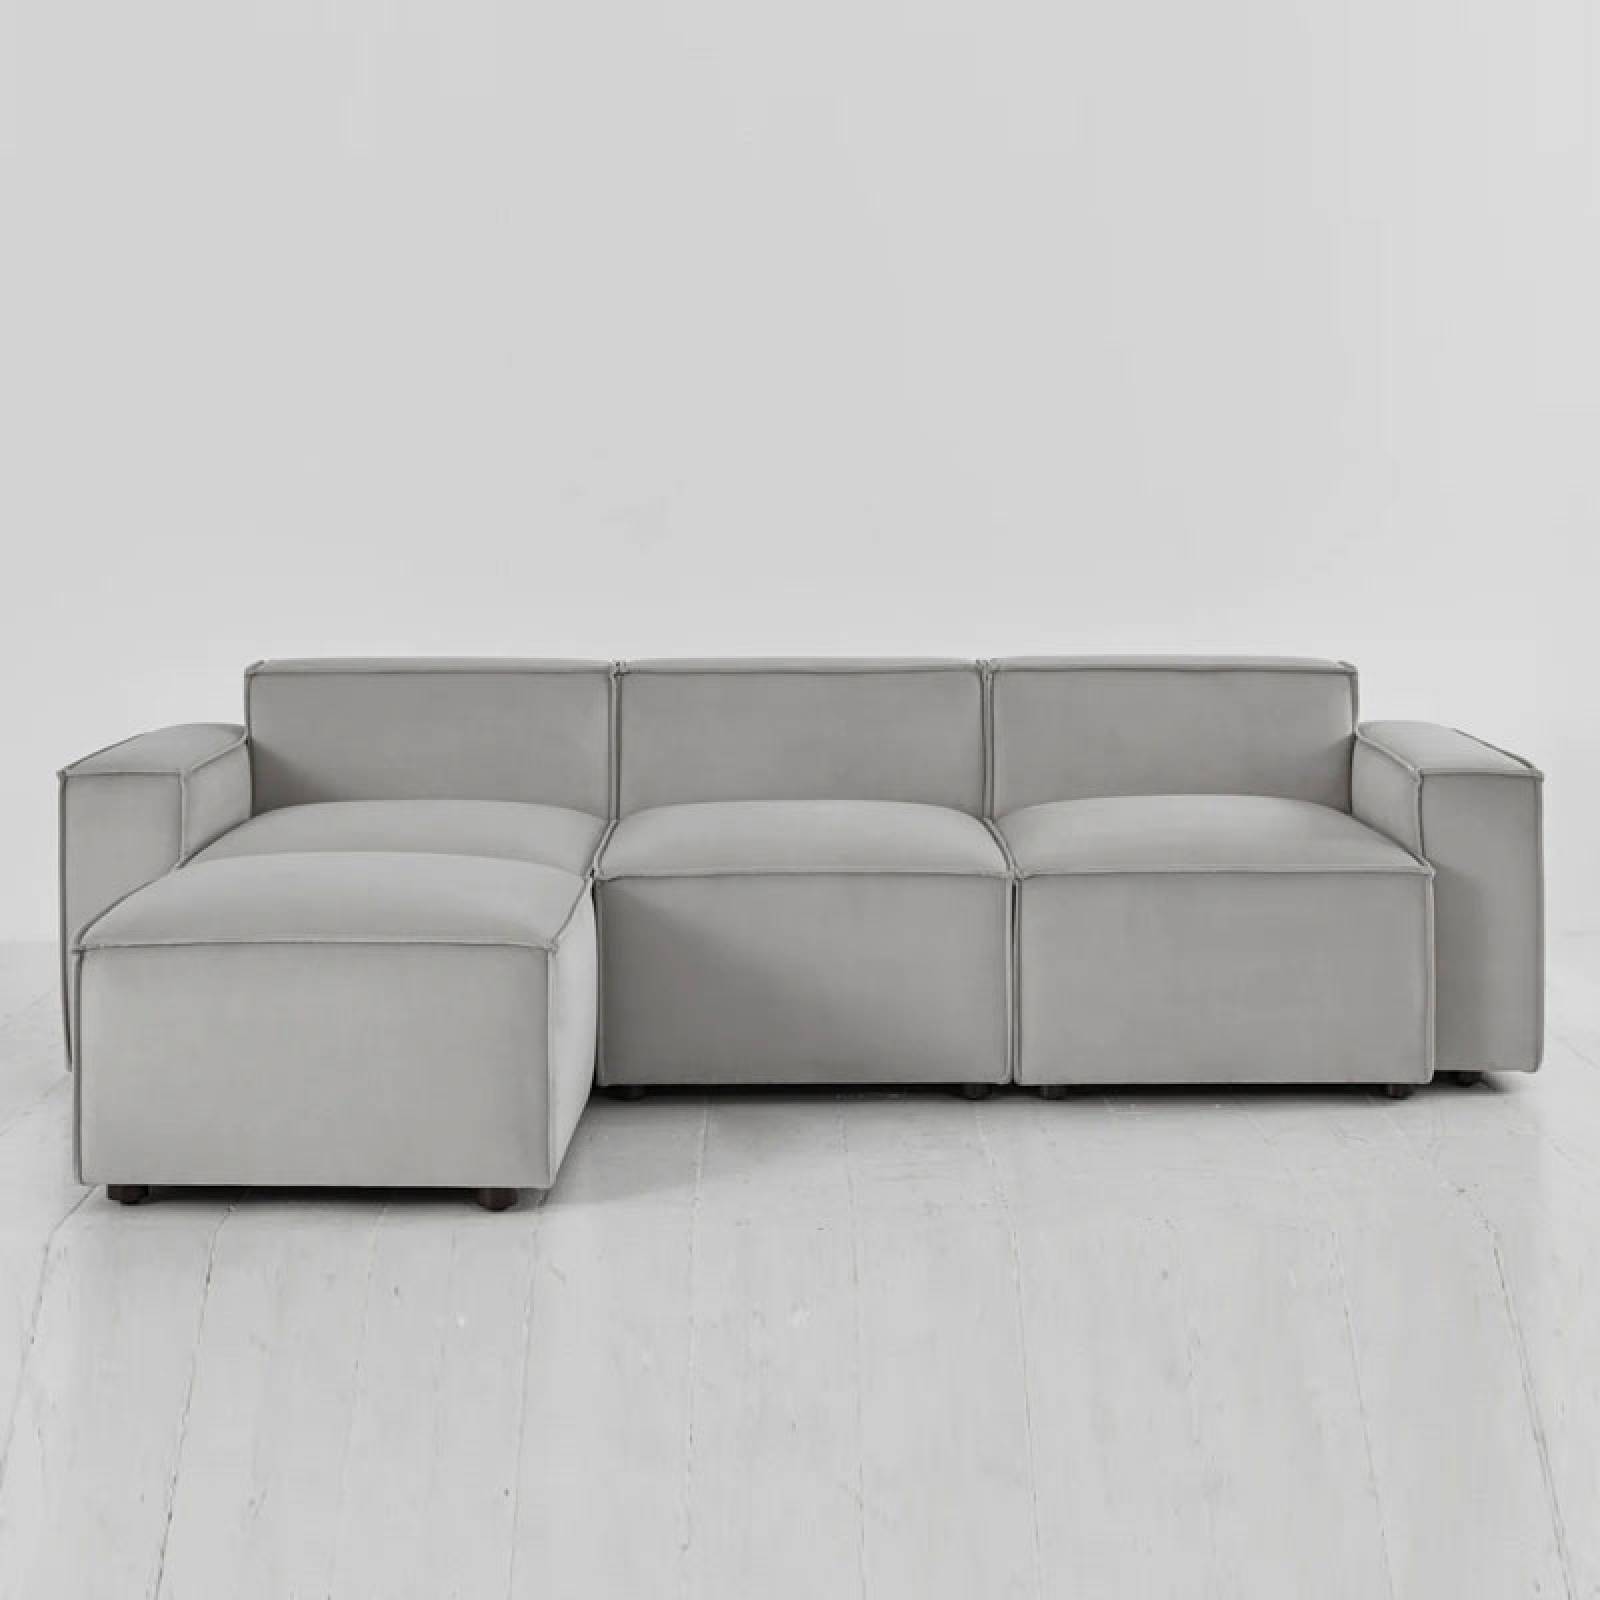 Swyft - Model 03 - 3 Seater Chaise Sofa - Left or Right